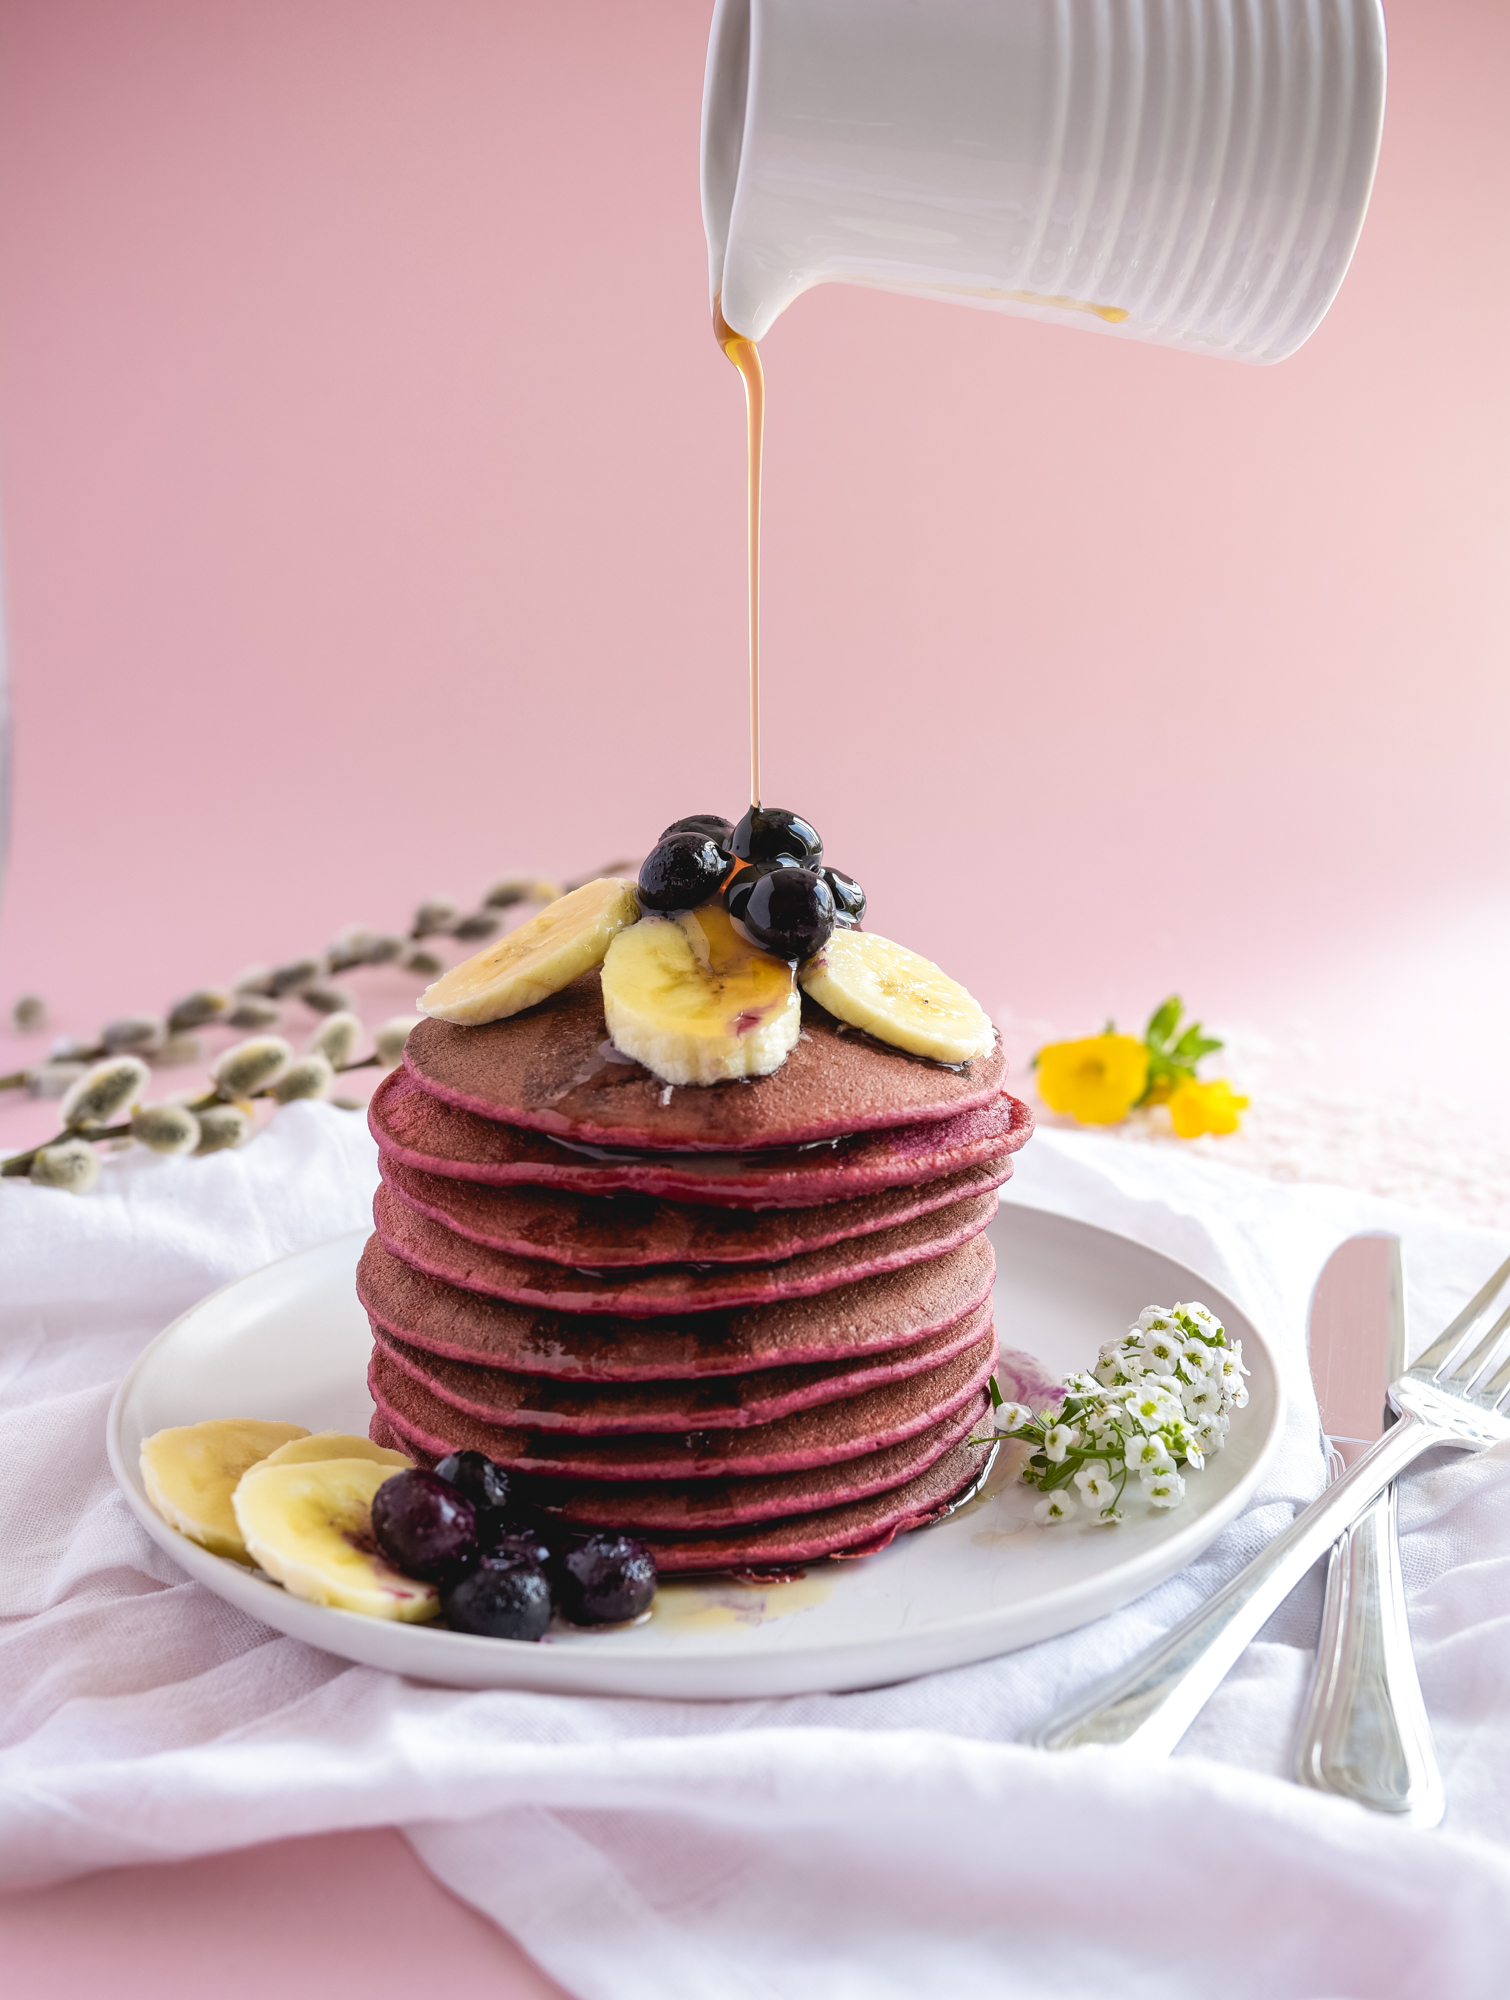 Gluten free and dairy free Beet Oat Pancakes